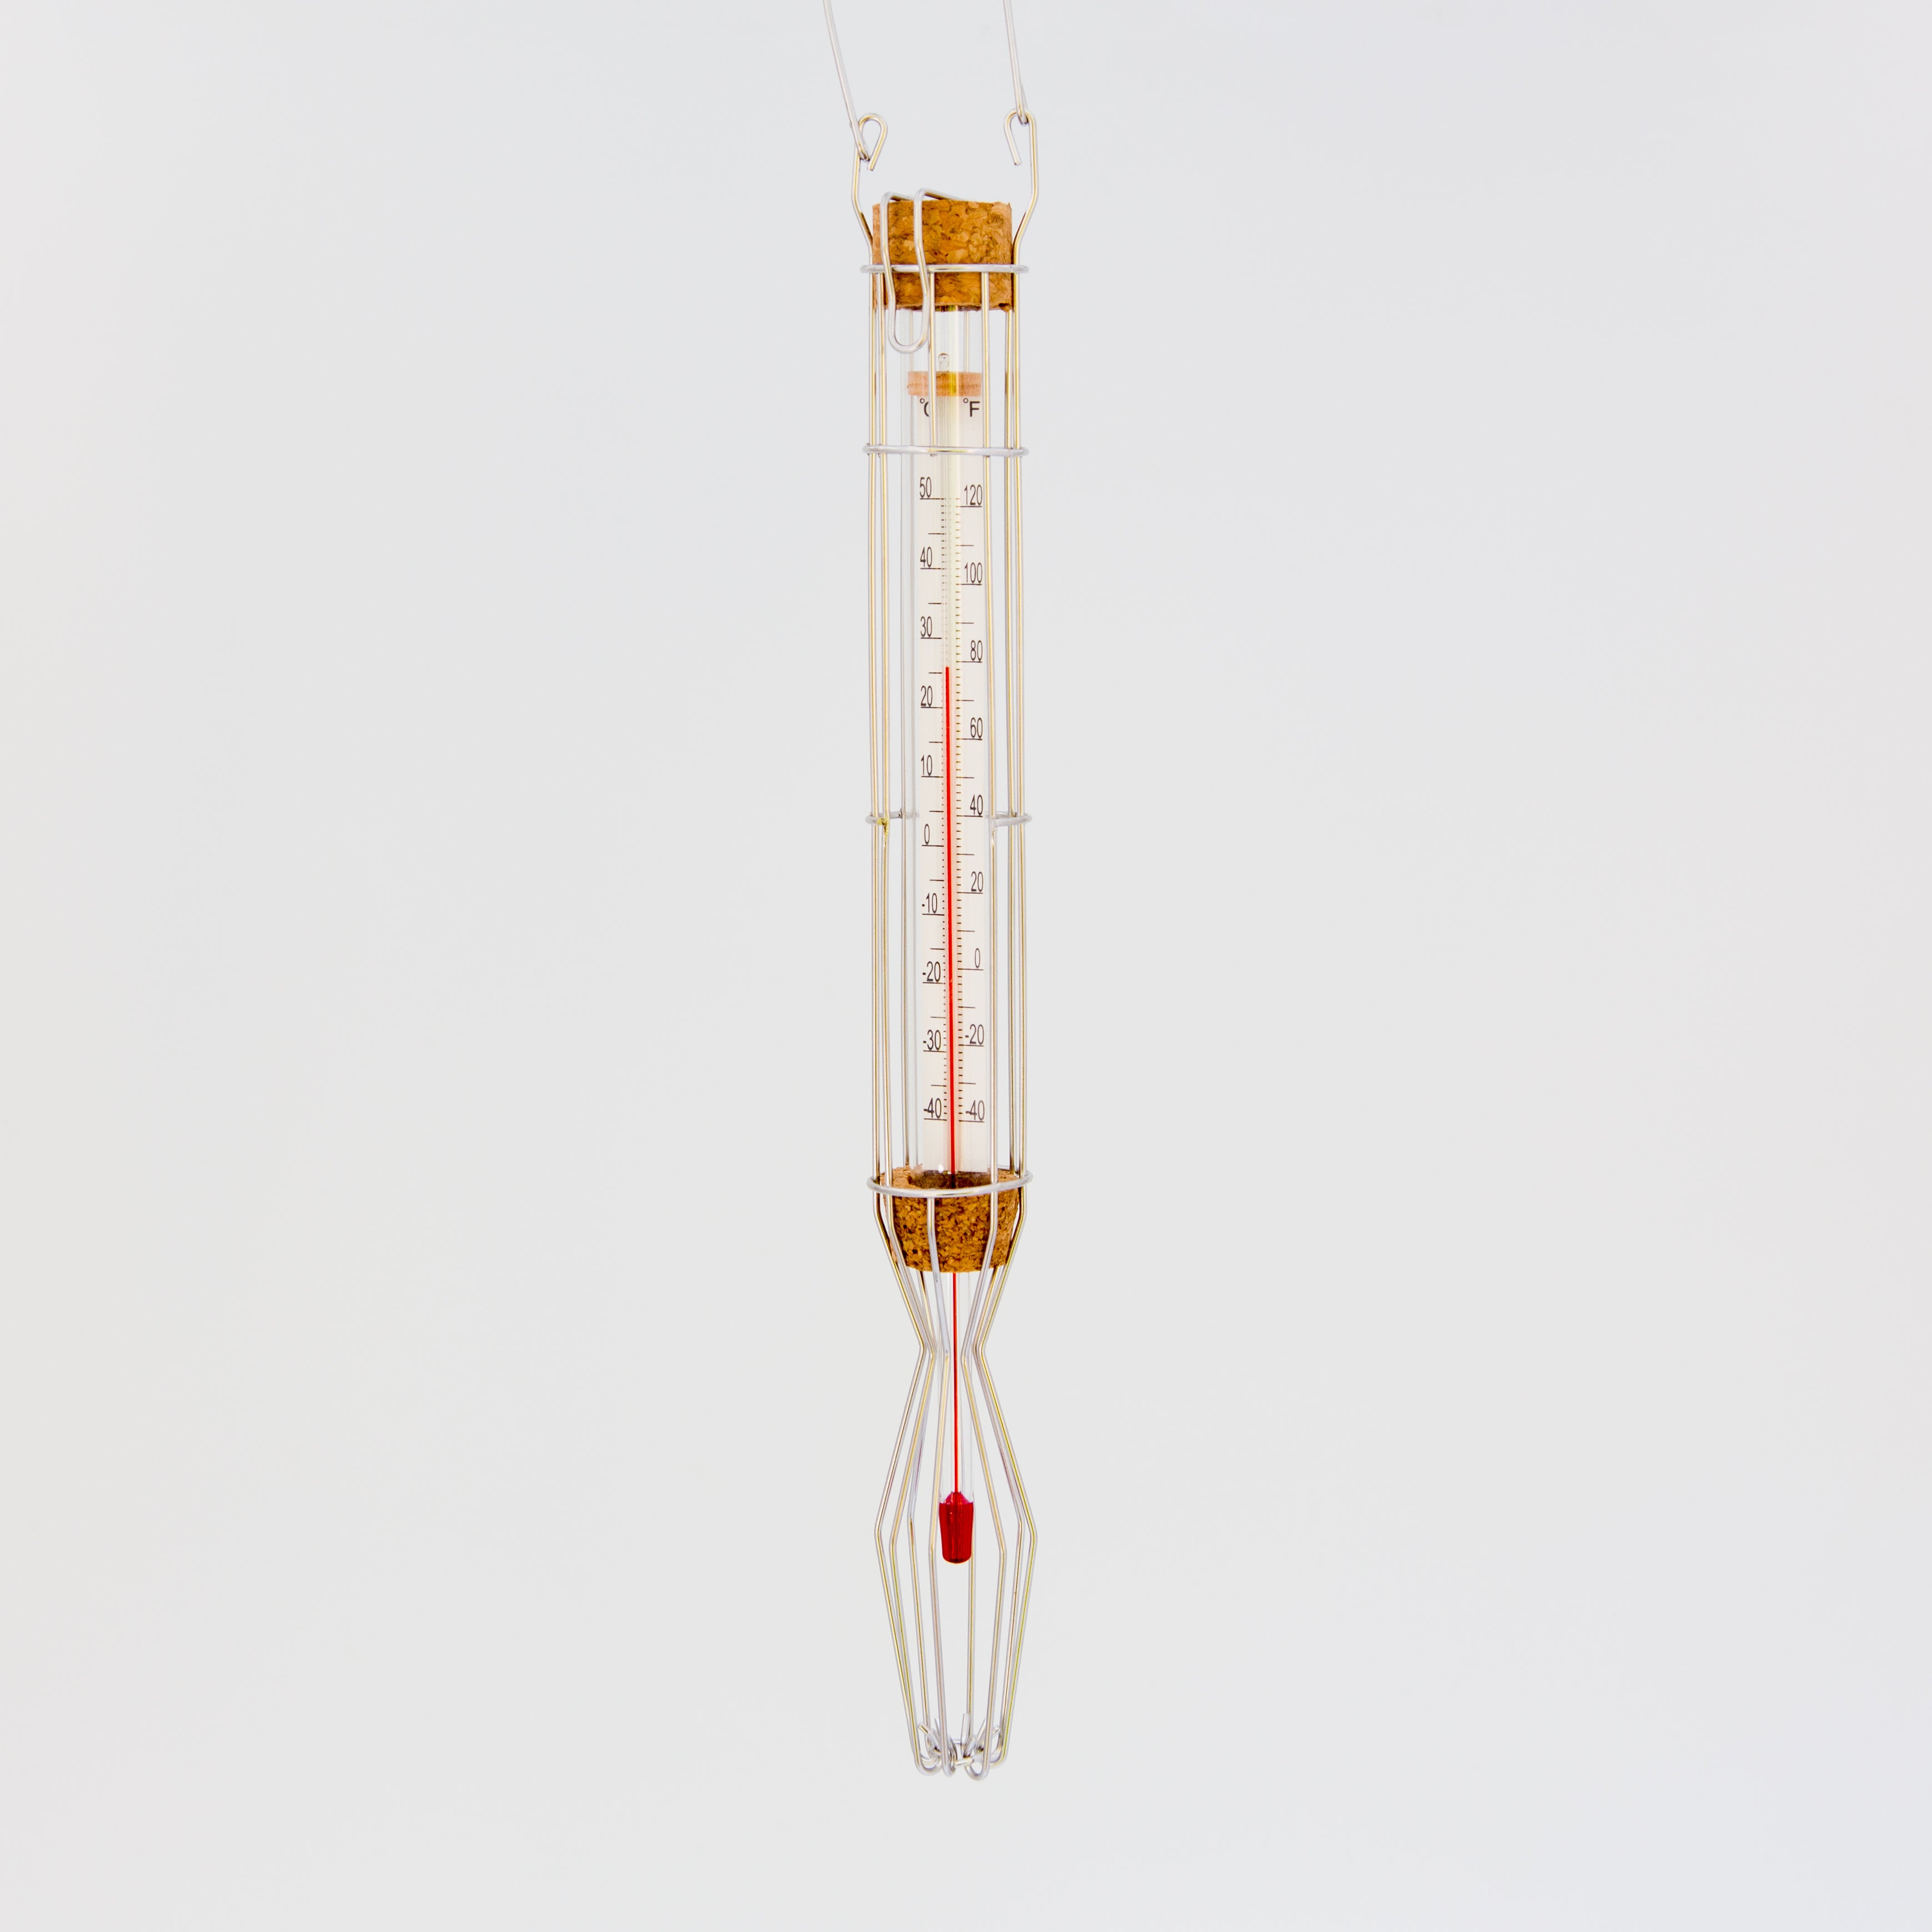 Thermometer – GRDN